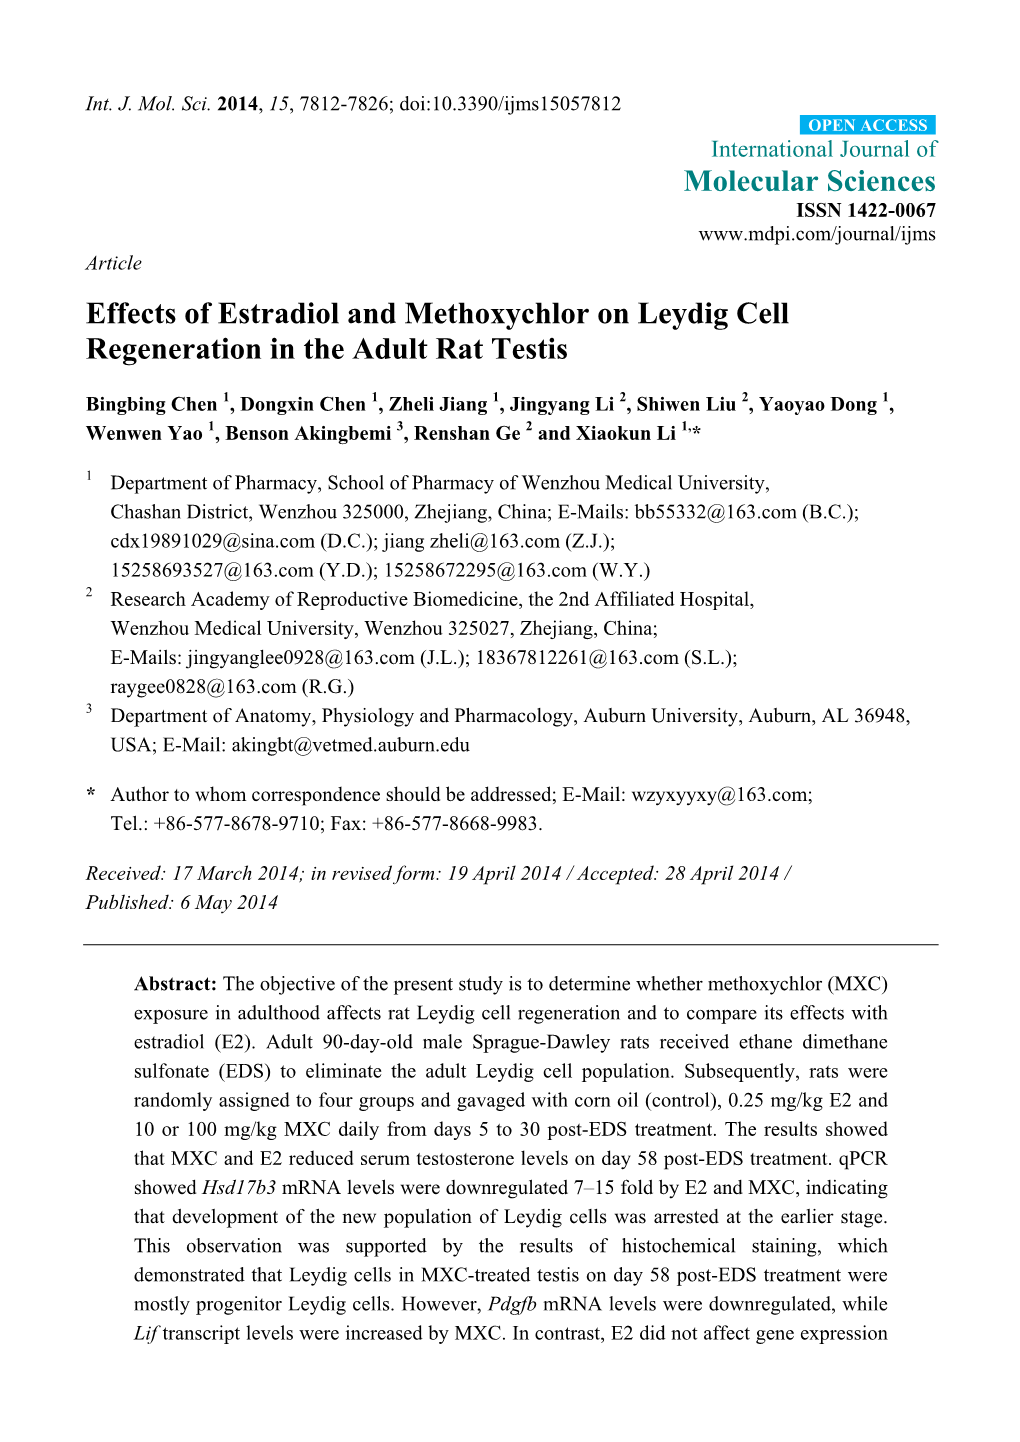 Effects of Estradiol and Methoxychlor on Leydig Cell Regeneration in the Adult Rat Testis